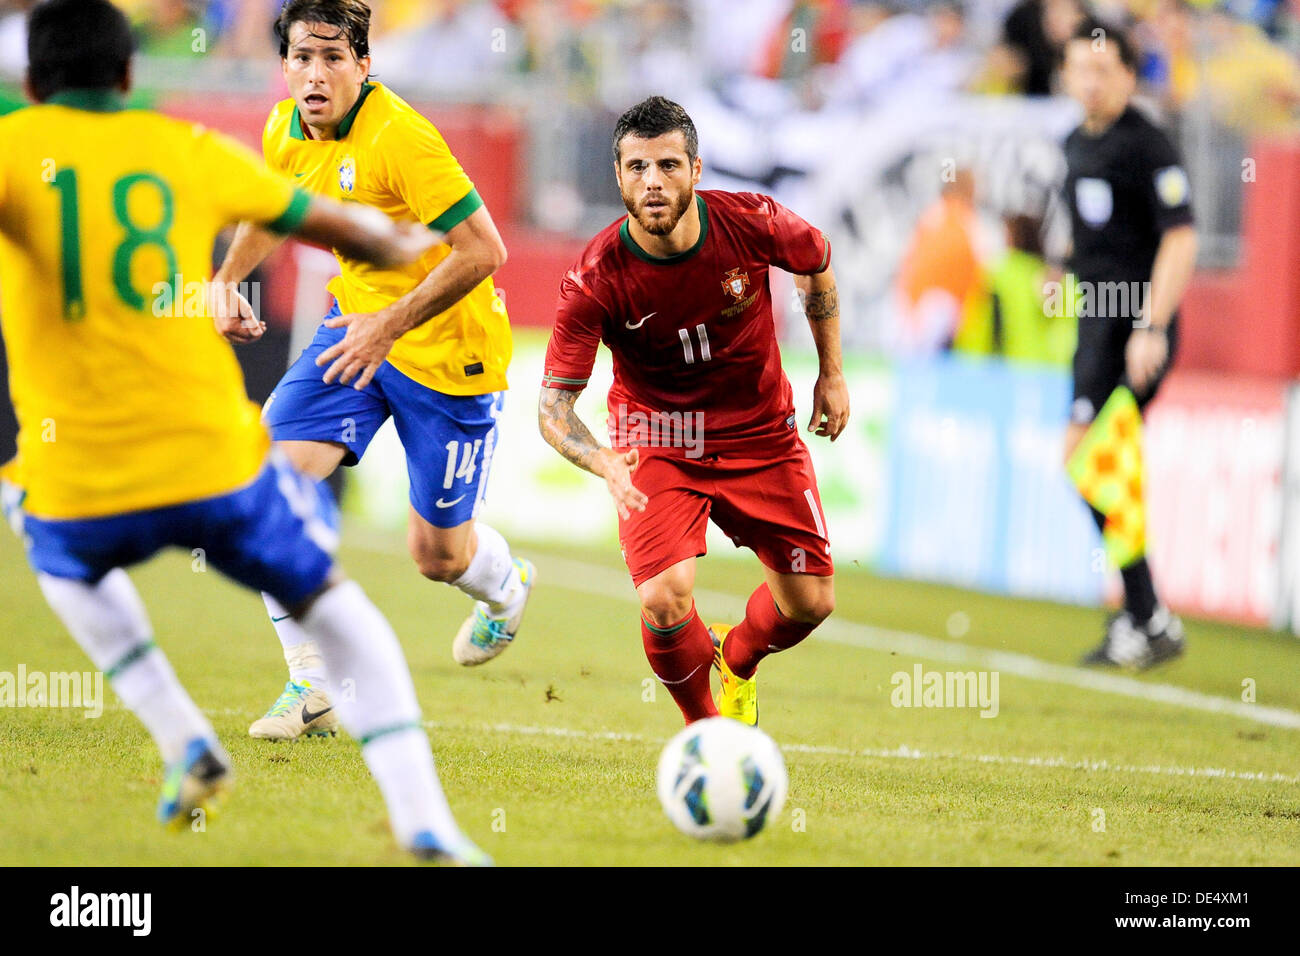 Foxborough, Massachusetts, USA. 10th Sep, 2013. Portugal's Vieirinha (11) chases the ball during the FIFA friendly match between Brazil and Portugal held at Gillette Stadium in Foxborough Massachusetts. Final score Brazil 3 Portugal 1 Eric Canha/CSM. Credit:  csm/Alamy Live News Stock Photo